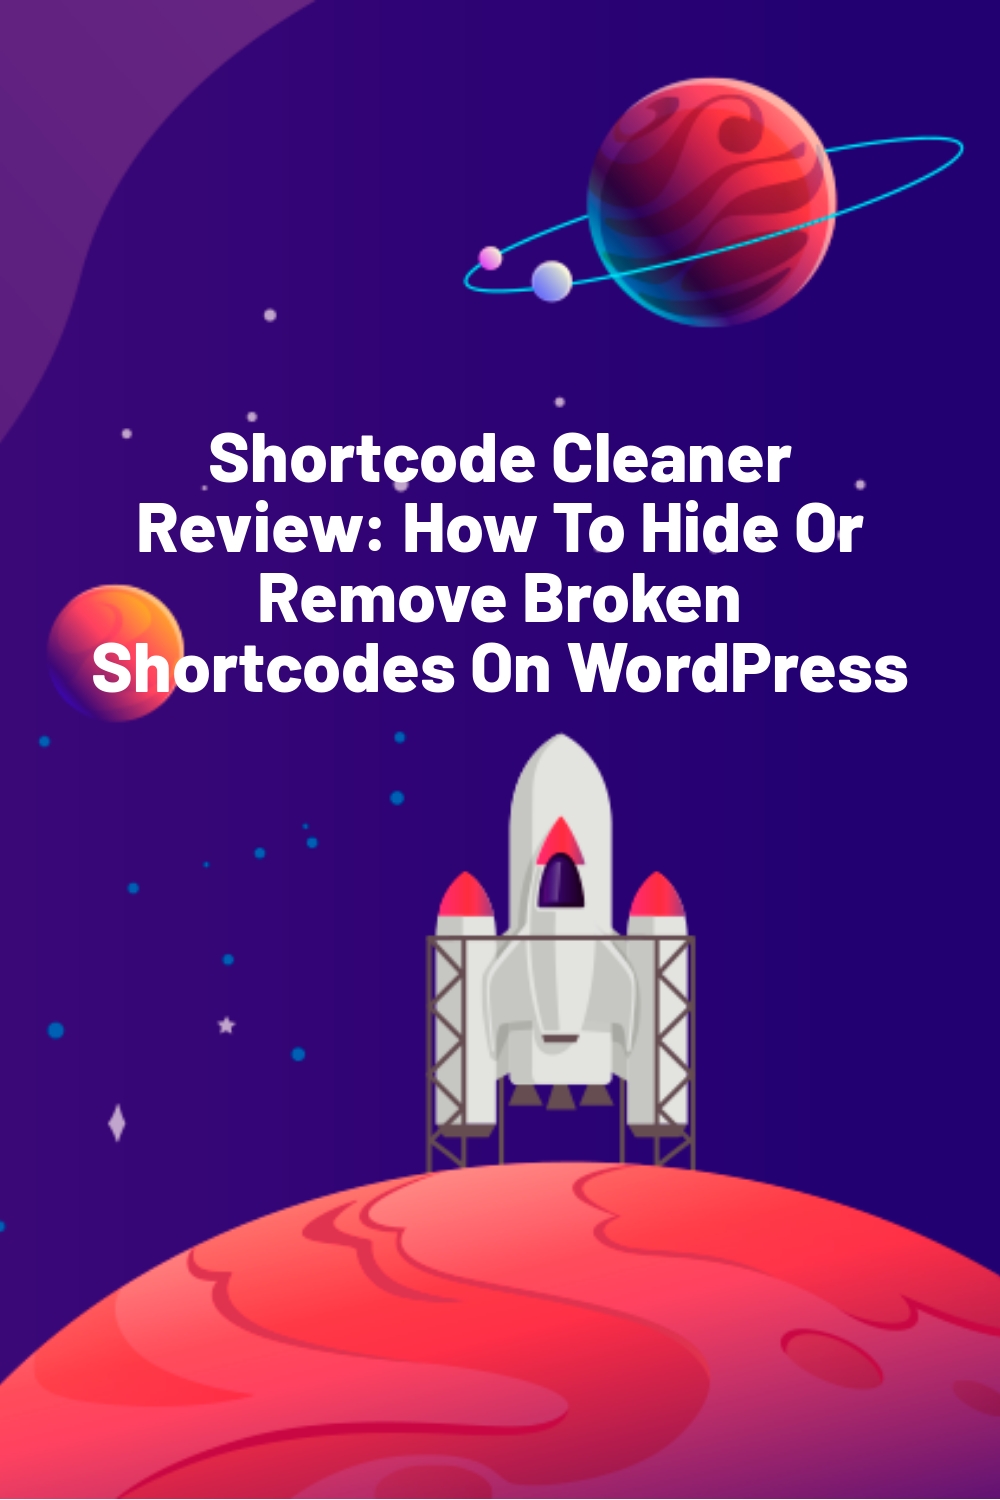 Shortcode Cleaner Review: How To Hide Or Remove Broken Shortcodes On WordPress